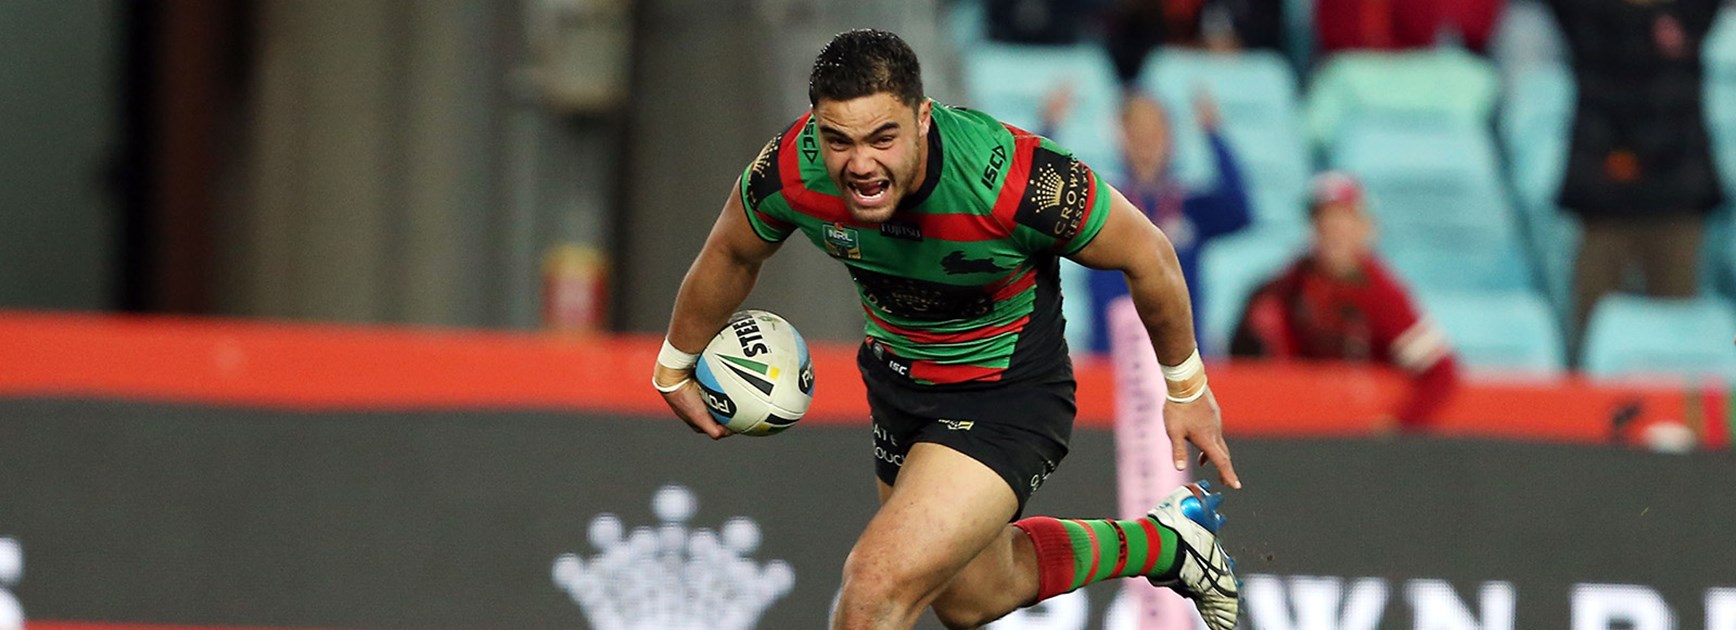 Rabbitohs centre Dylan Walker scored a hat-trick of tries against the Knights in Round 20 of the NRL Telstra Premiership.